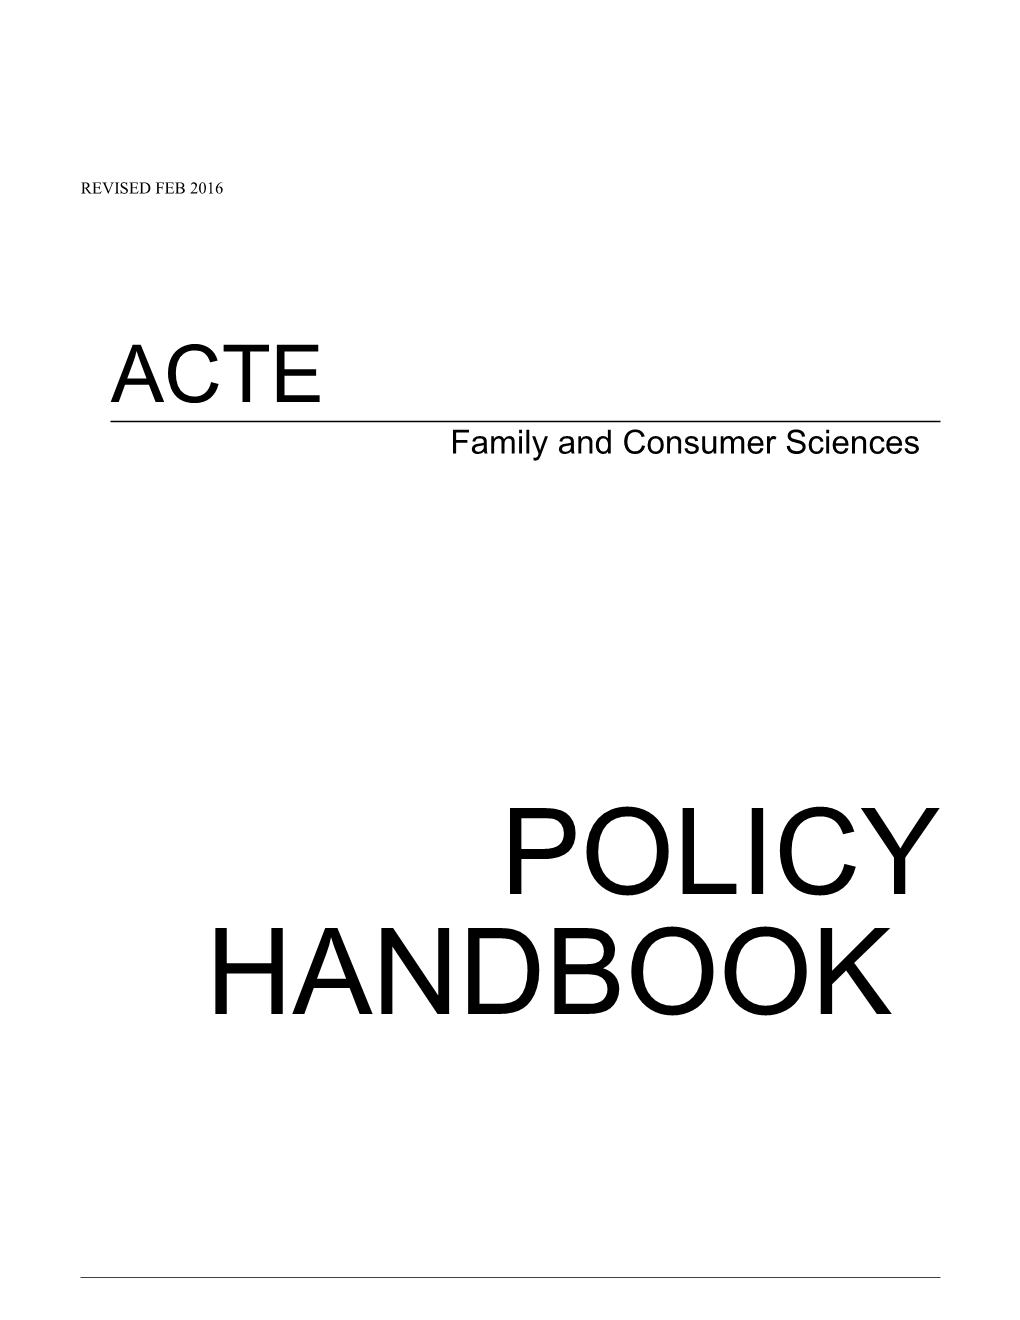 Family and Consumer Sciences